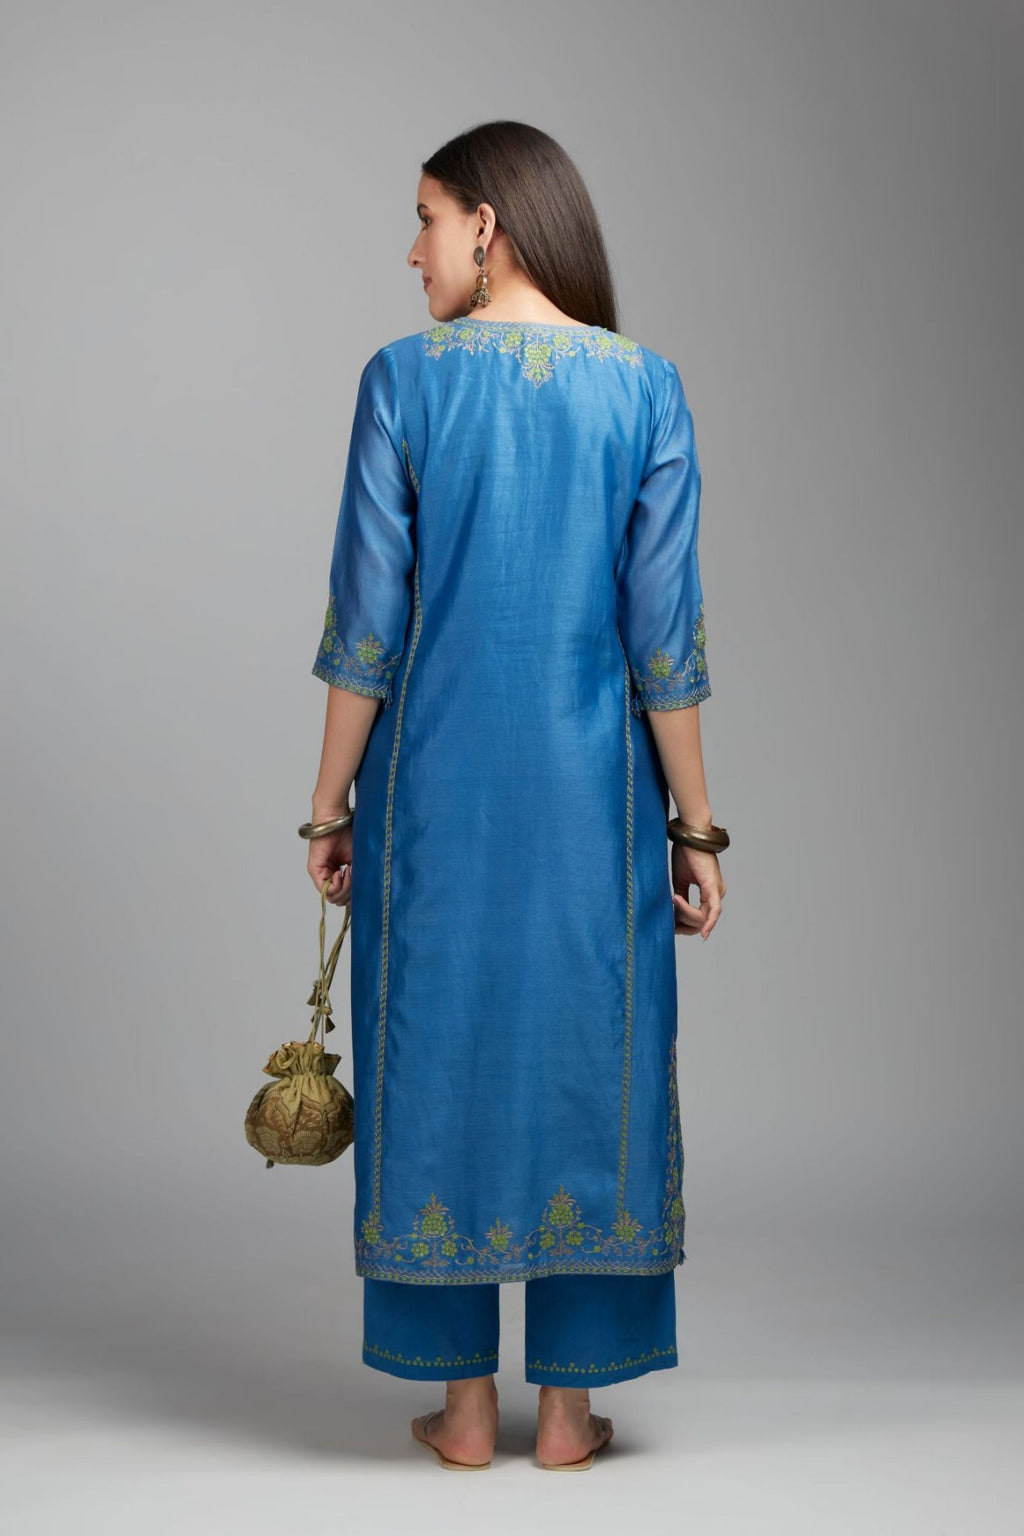 Blue straight kurta set detailed with contrast coloured embroidery at neck and side panel joint seams